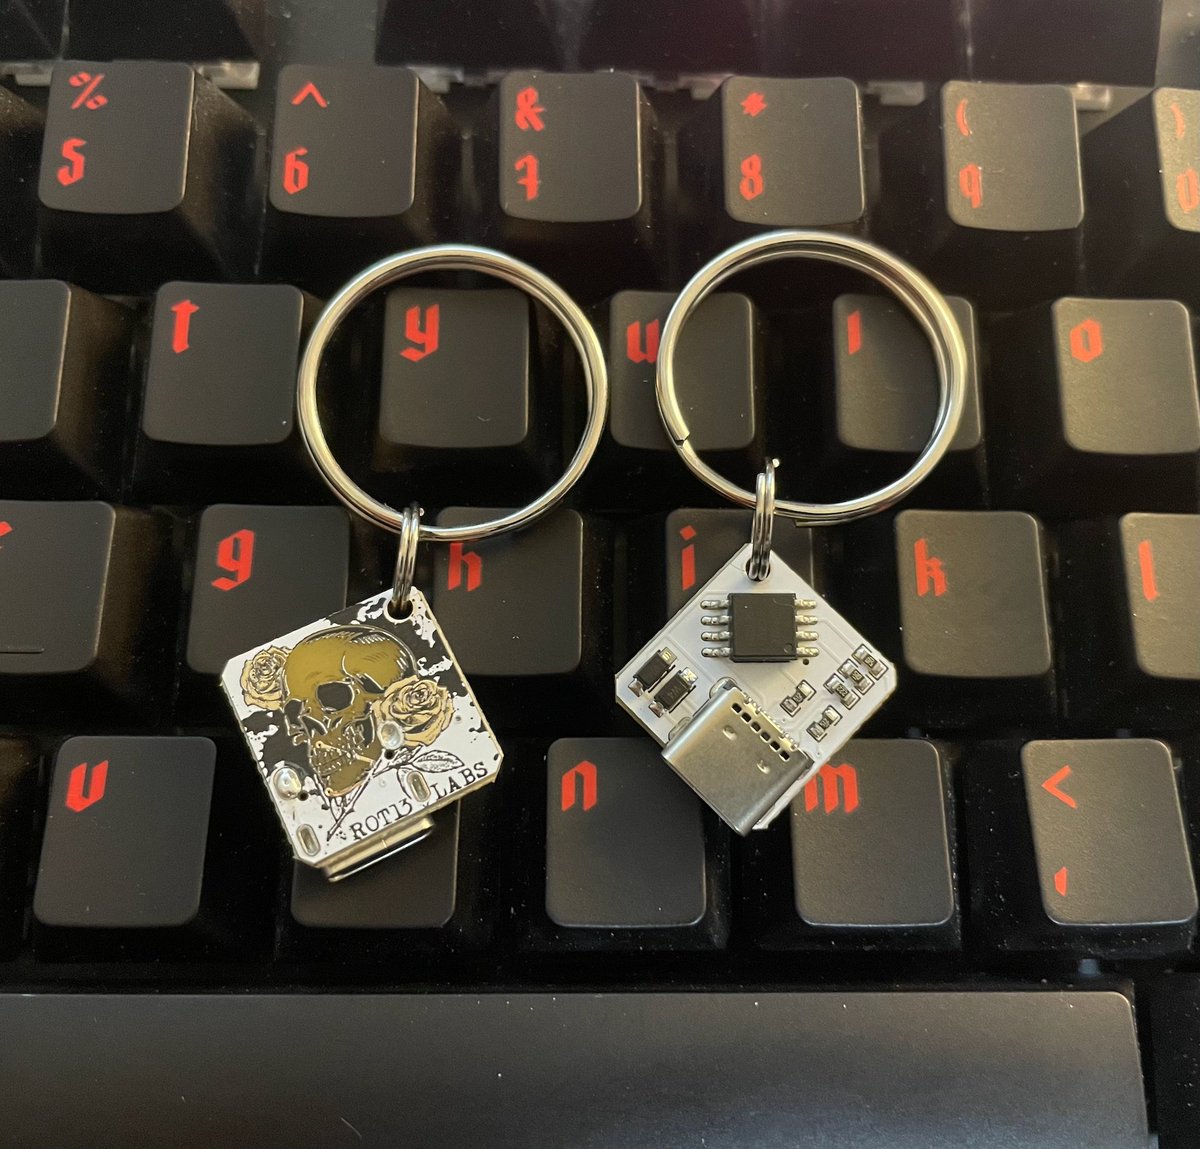 Finally got a chance to restock the functional badUSB earrings in my shop! I also added options for a single earring and a new keychain option for those without their ears pierced! #badgelife 

goimagine.com/functional-bad…